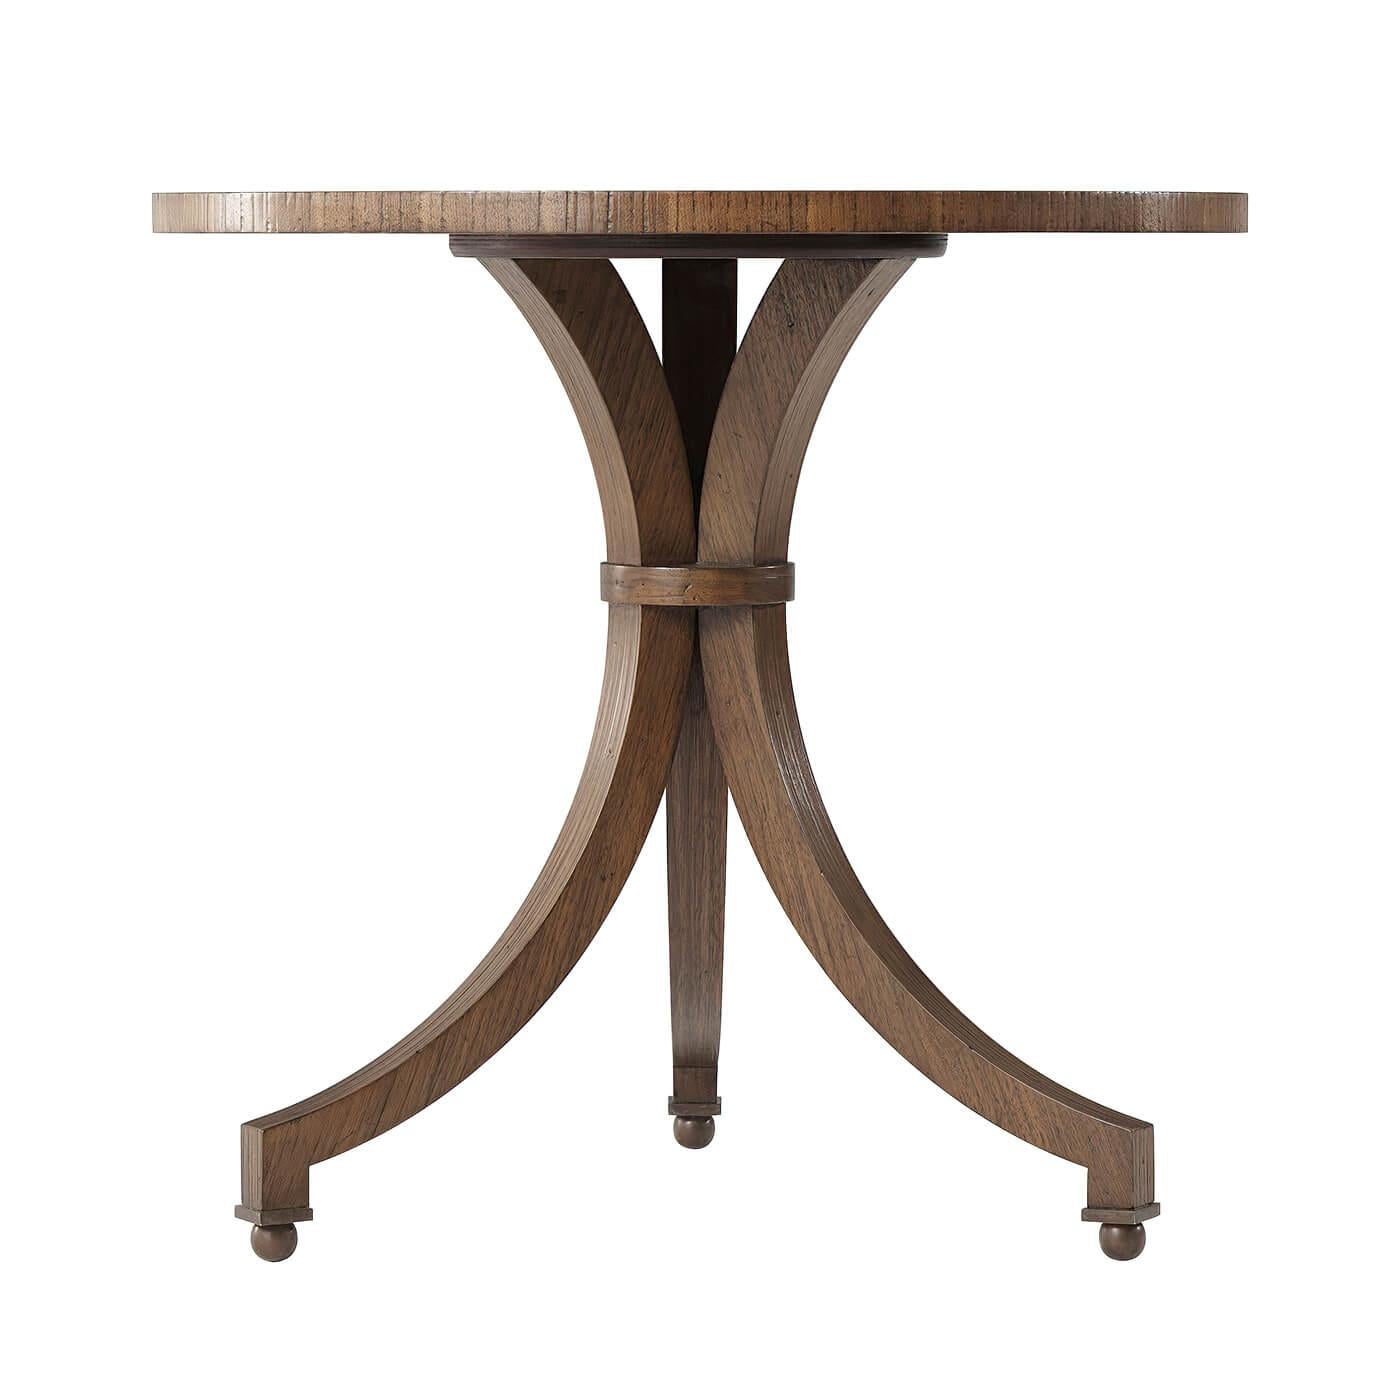 Modern Neo Classic Dutch walnut side table with hewn 'hazel' walnut finish and brass feet. Inspired by an early 19th-century Dutch table, this modern interpretation sits well amongst both modern and traditional decor.
Dimensions: 28